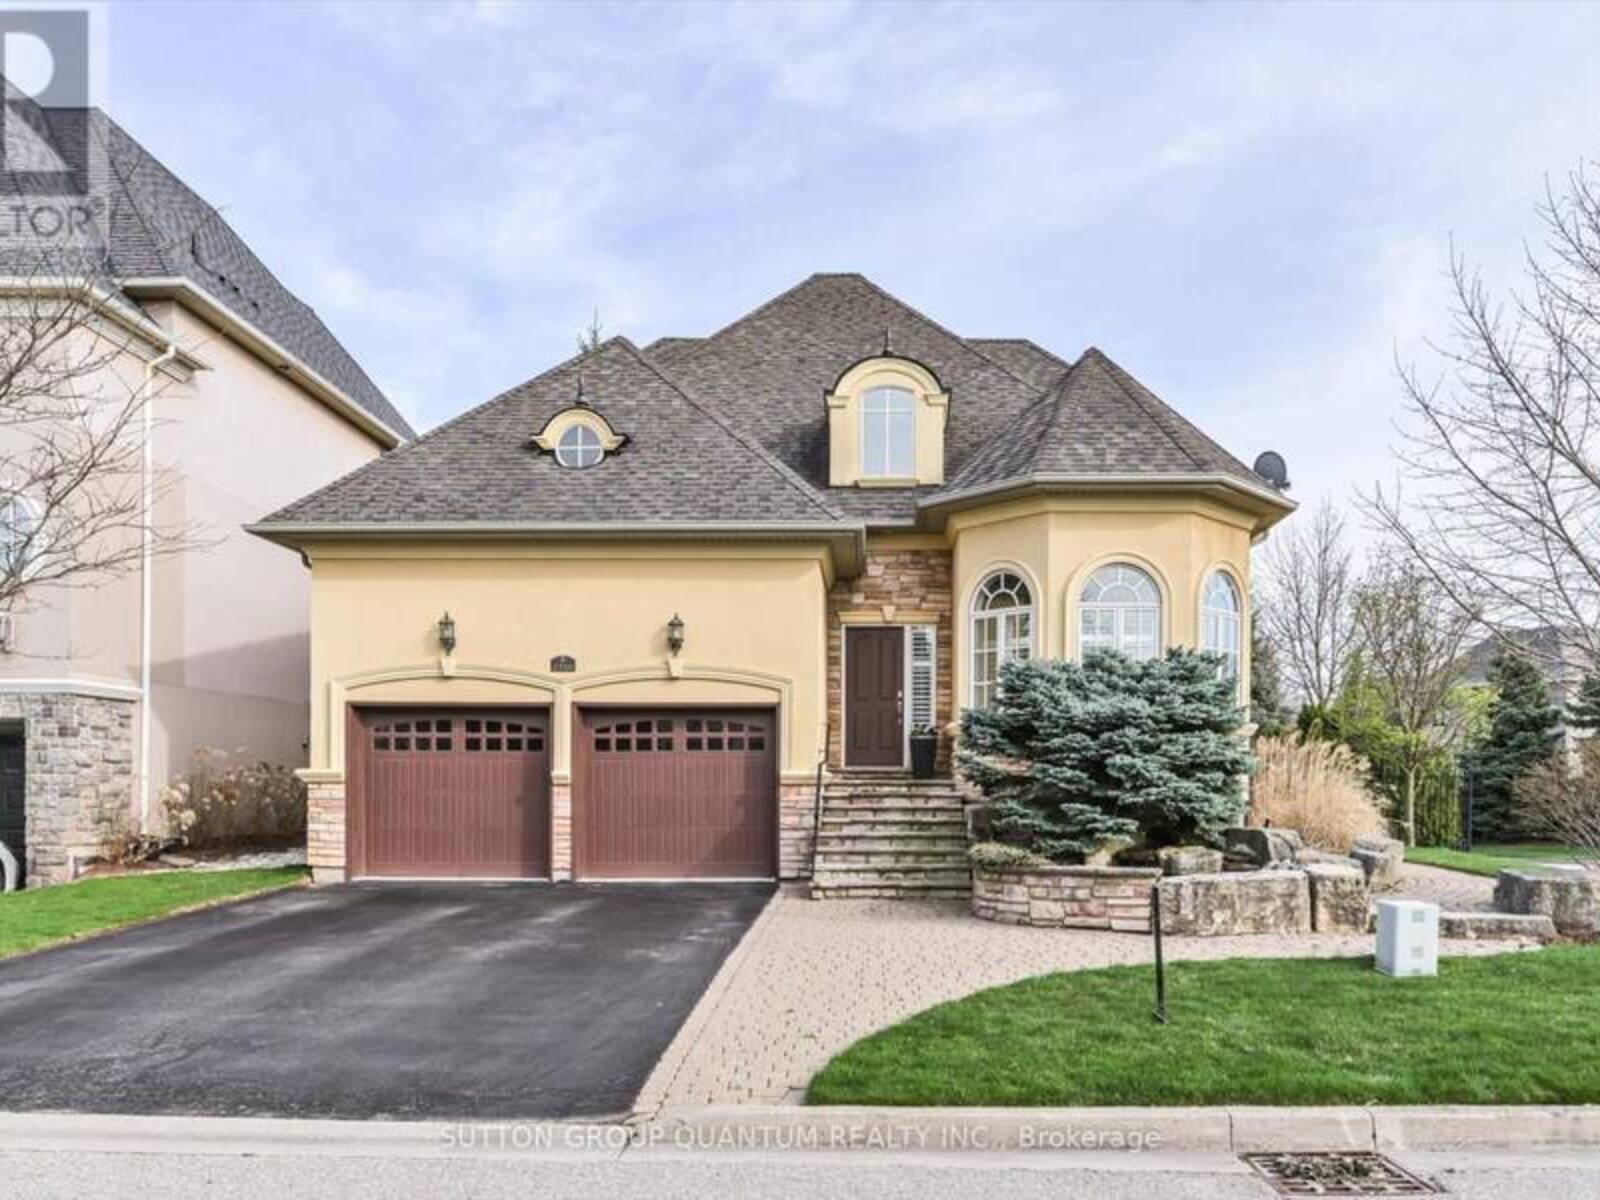 2258 PROVIDENCE RD, Oakville, Ontario L6H 6Y9